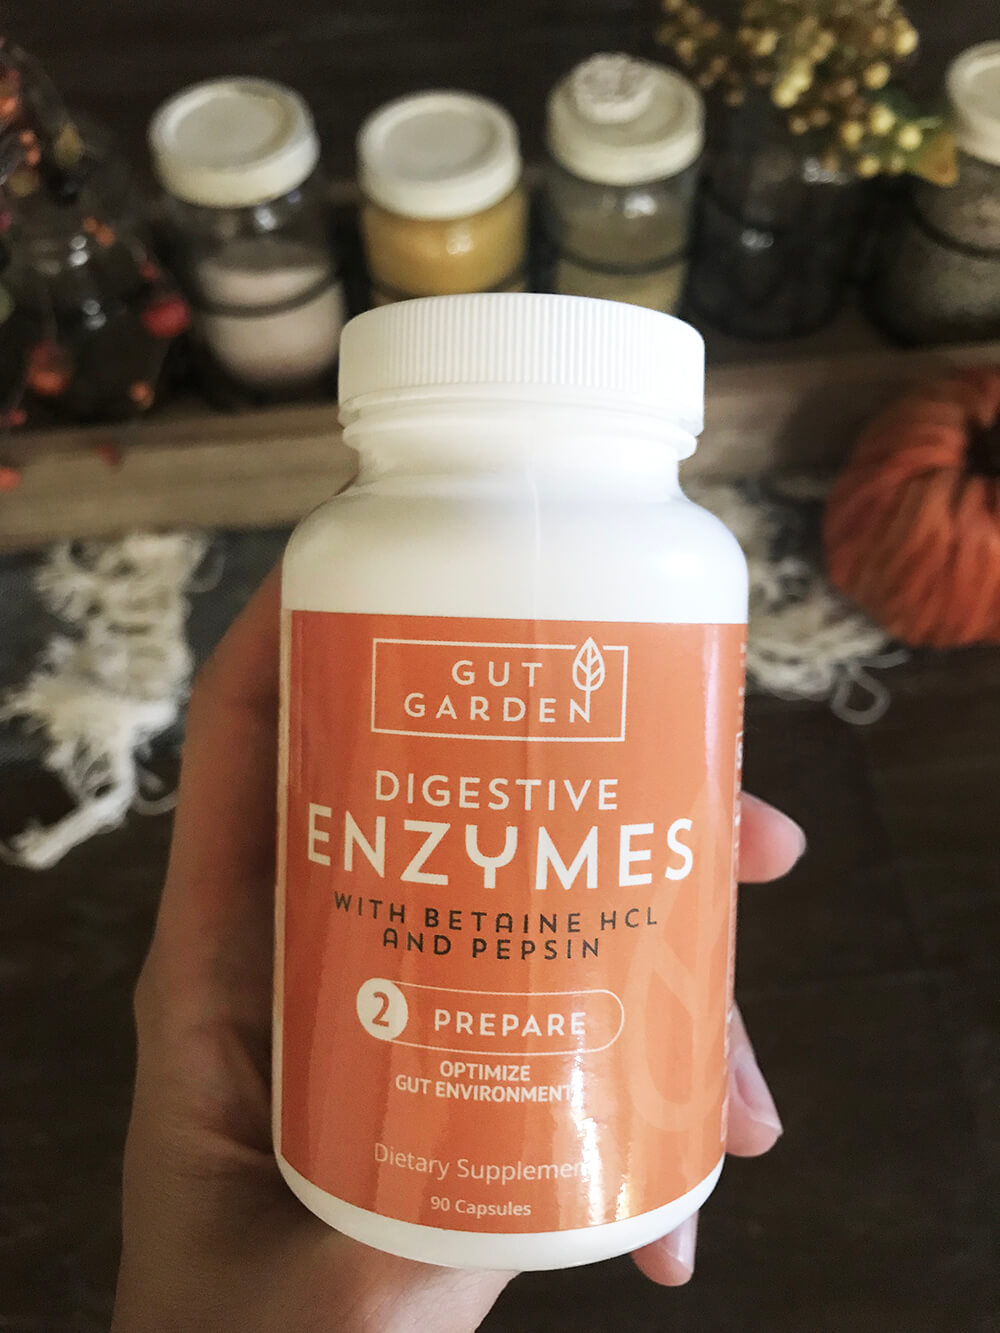 What are Digestive Enzymes agutsygirl.com Gut Garden digestion supplement #enzymes #guthealth #digestiveenzyme #supplements